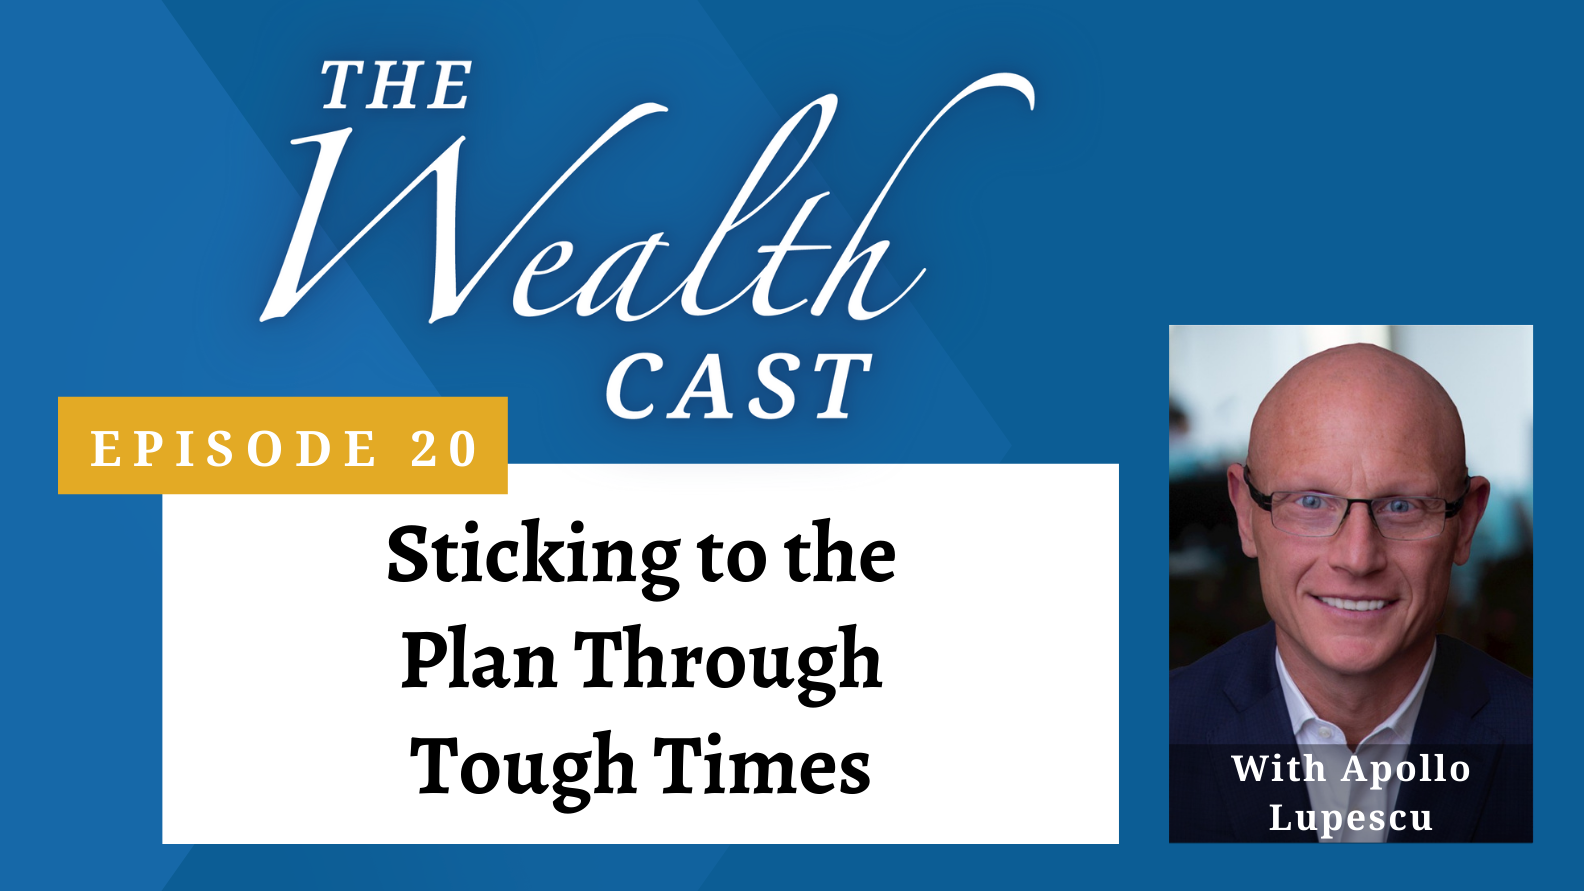 The Wealth Cast Episode 20: Sticking to the Plan Through Tough Times with Apollo Lupescu